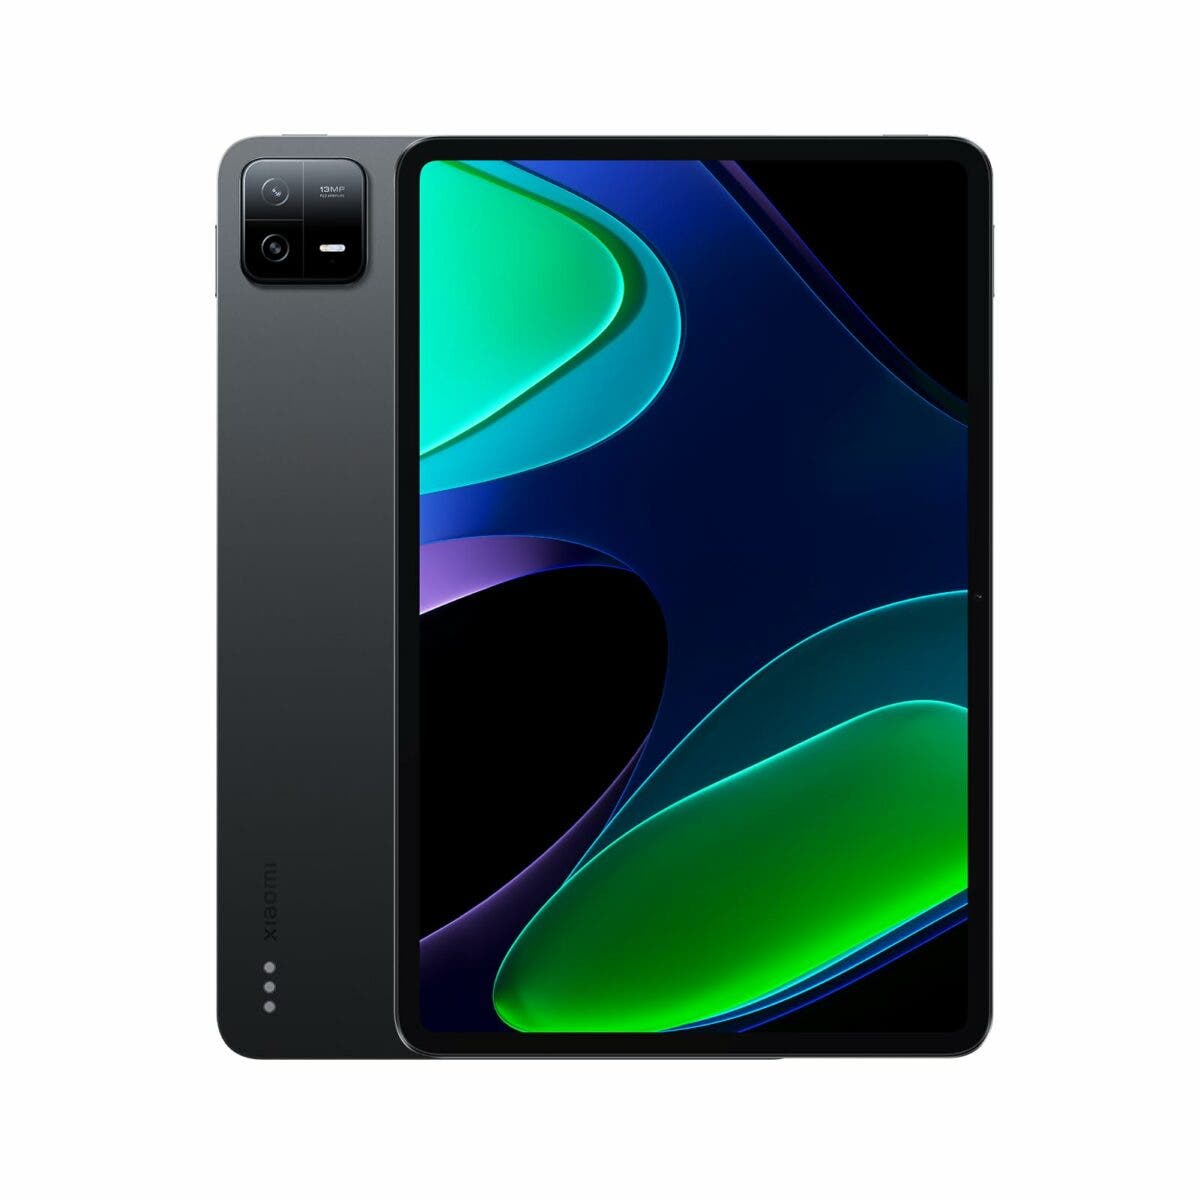 Xiaomi Pad 6s Pro To Arrive With A 144hz Display And Sd 8 Gen 2 2385